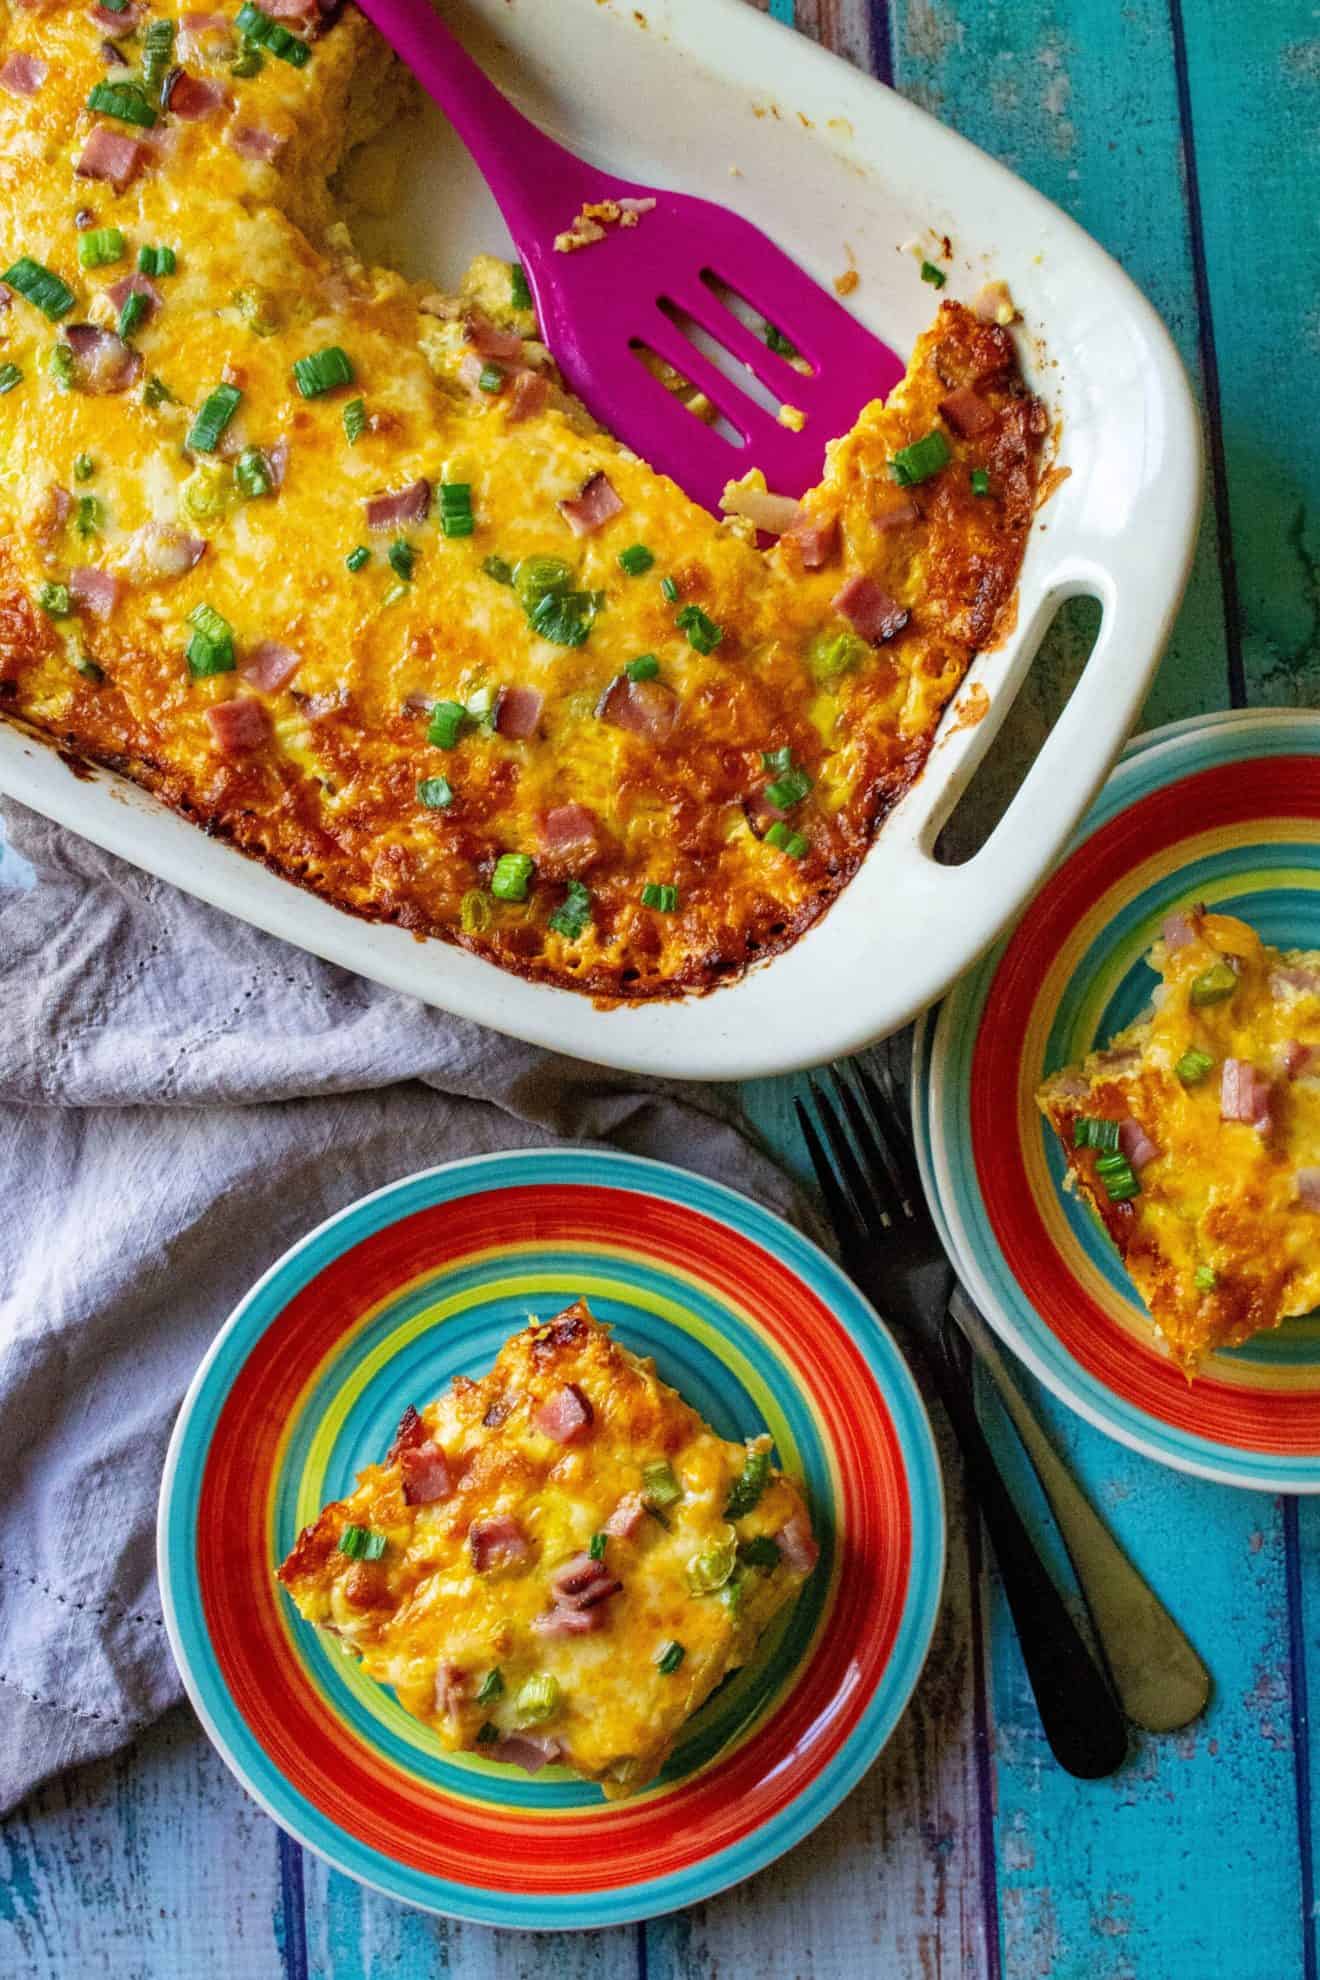 HAM AND CHEESE HASH BROWN BREAKFAST CASSEROLE10 (2) | A Wicked Whisk